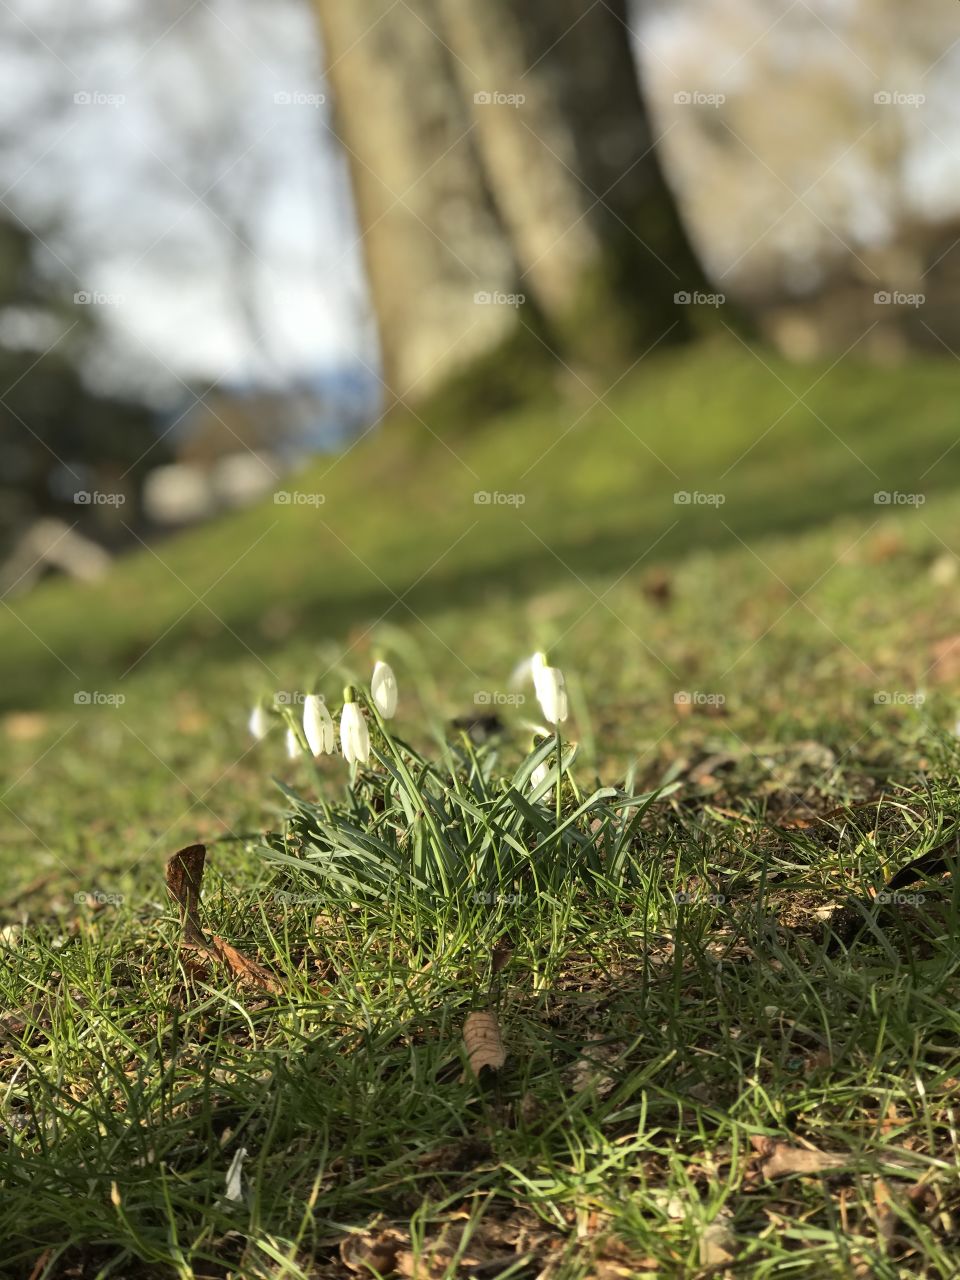 Little white Snowdrops blossoming in the grass in a favourite garden park. Will be visiting tomorrow again to get my Spring On with more flower shots! 🌷